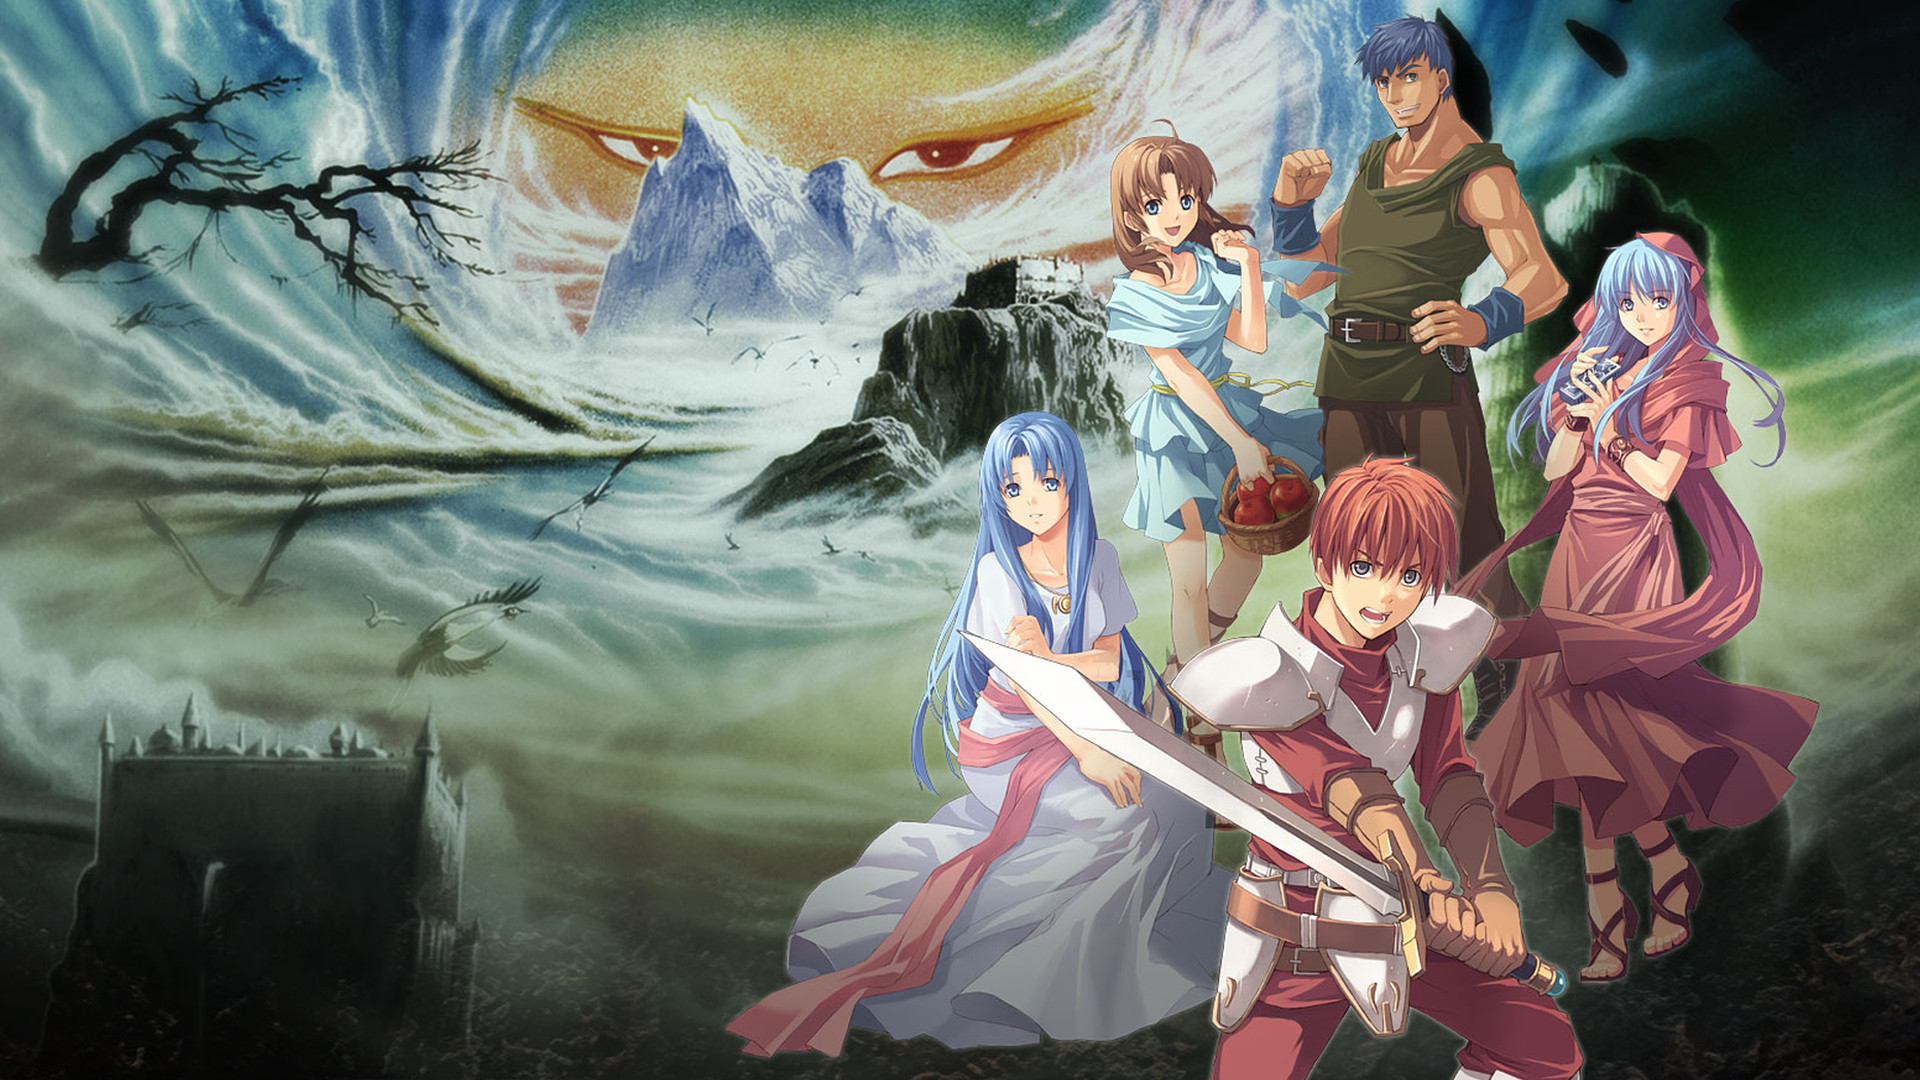 Ys II: Ancient Ys: Vanished The Final Chapter